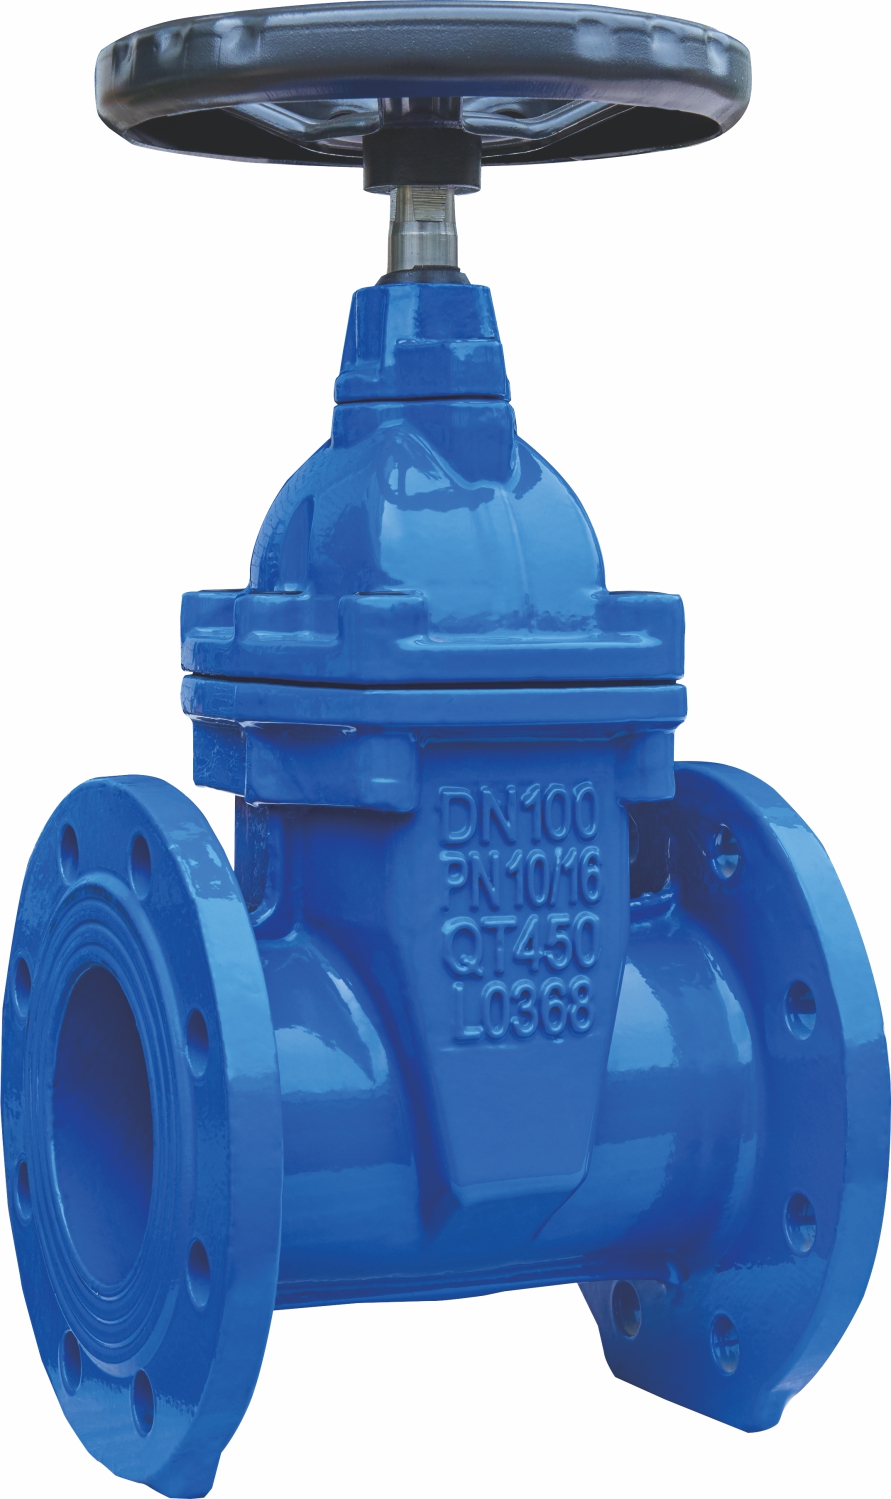 NRS Resilient-seated Gate Valve